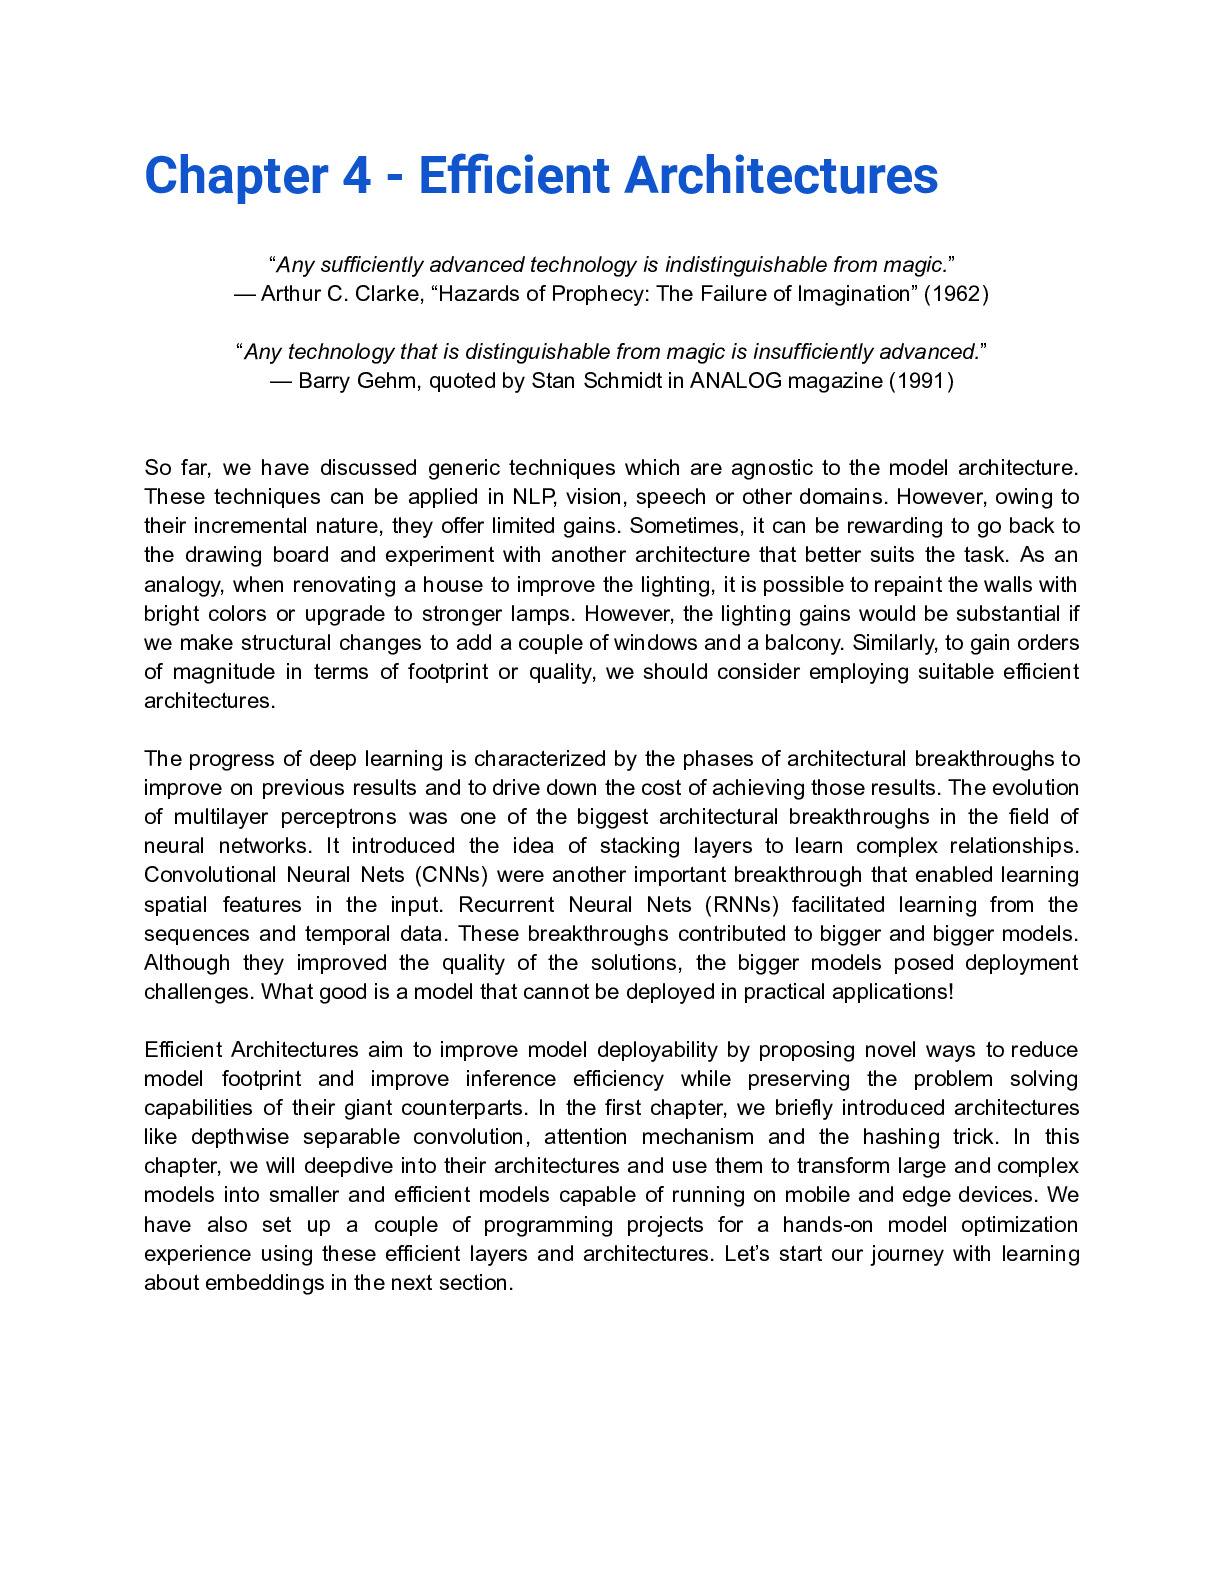 [EDL] Chapter 4 – Efficient Architectures